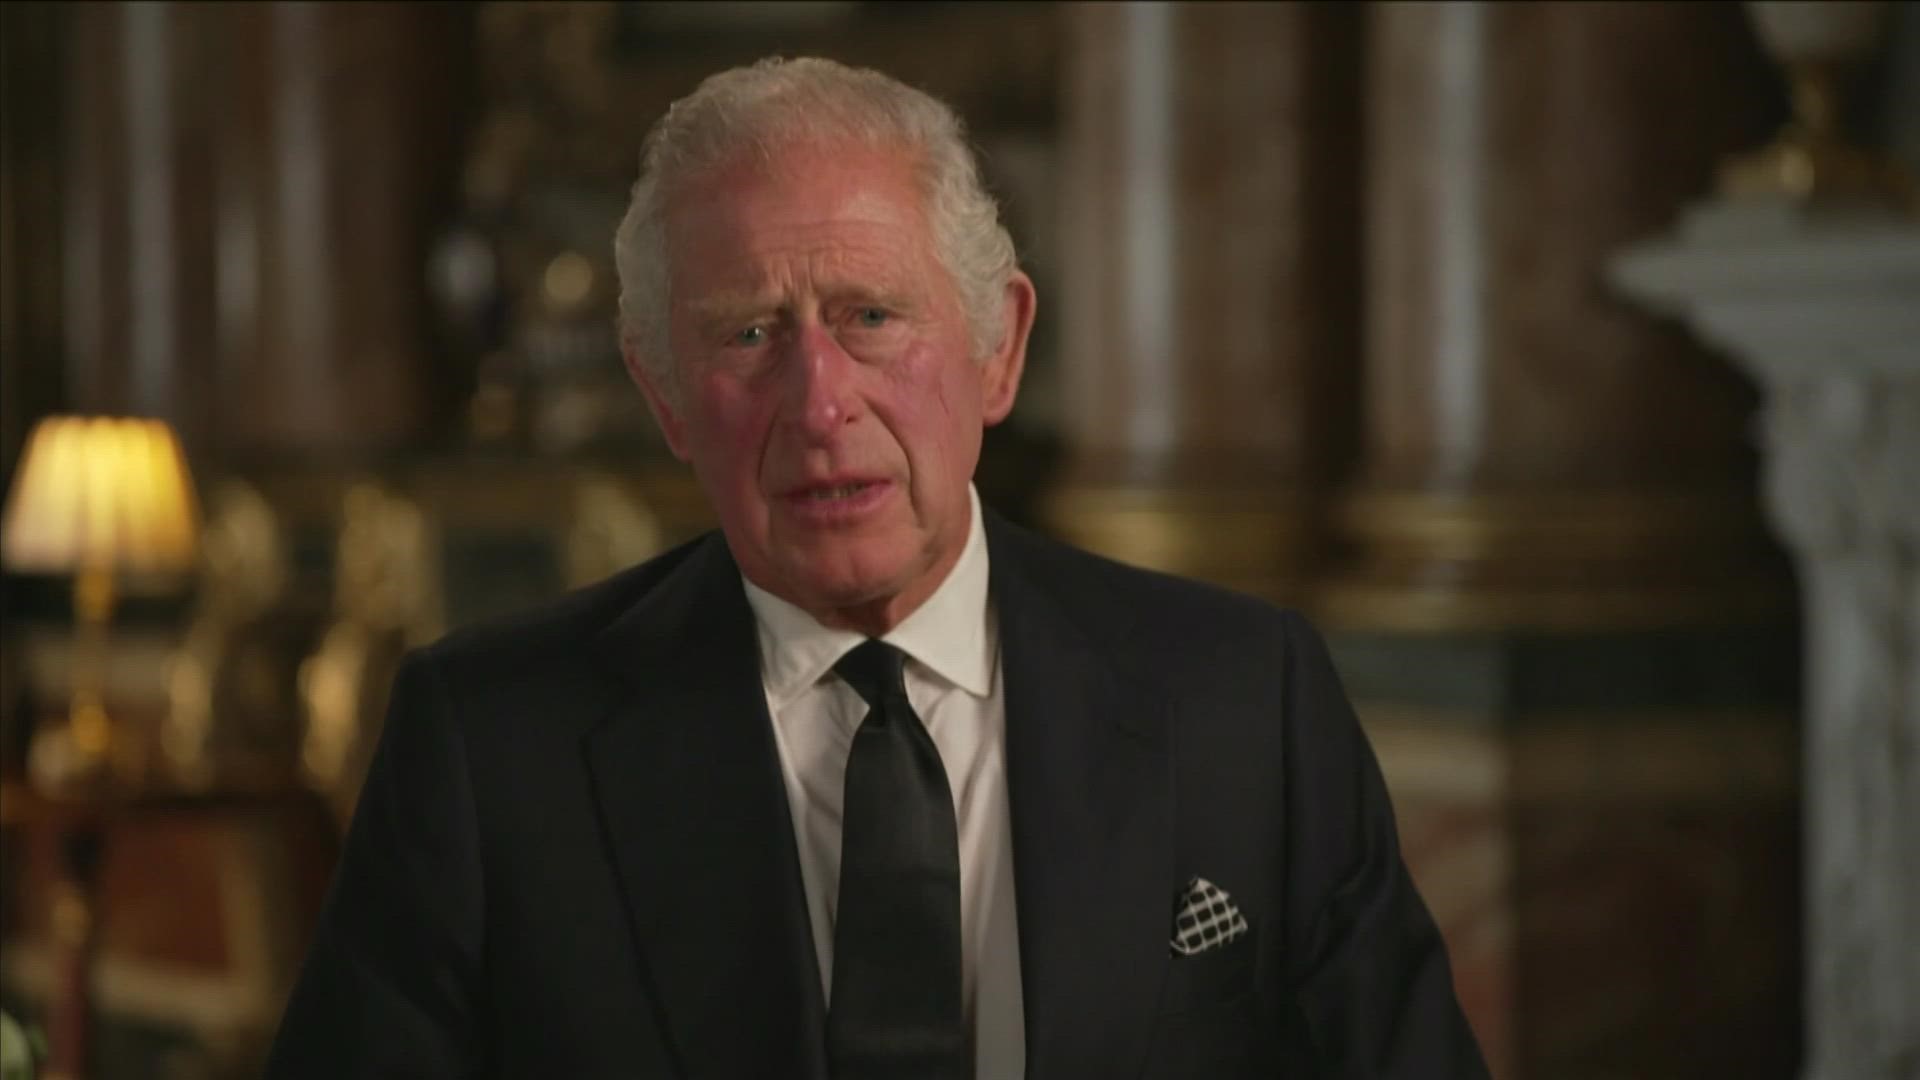 King Charles III says he feels “profound sorrow” over the death of his mother, Queen Elizabeth II, and vows to carry on her “lifelong service” to the nation.